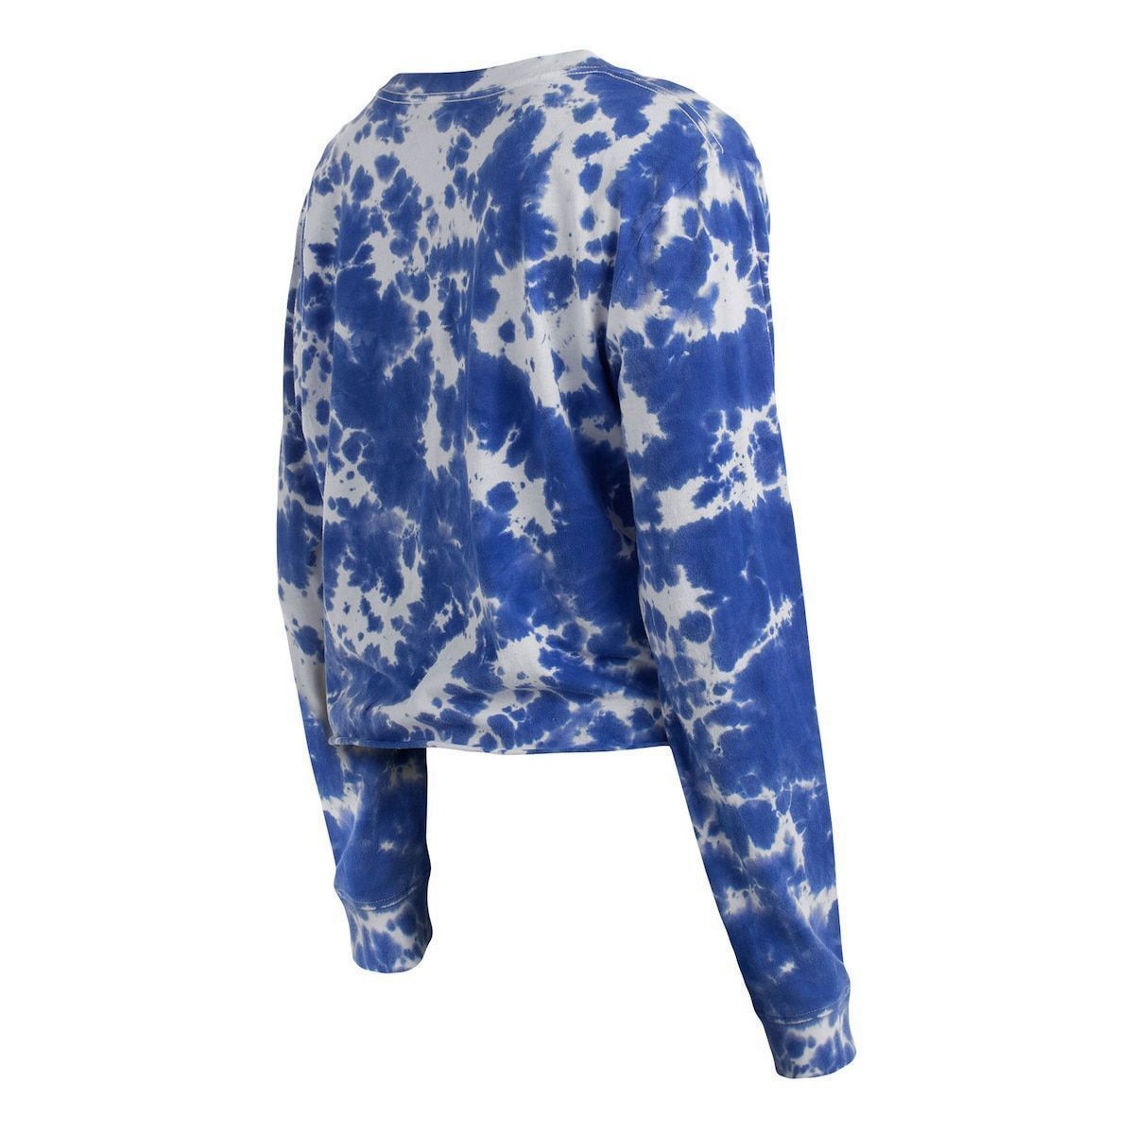 New Era Women's Royal Los Angeles Dodgers Tie-Dye Cropped Long Sleeve T-Shirt - Image 4 of 4